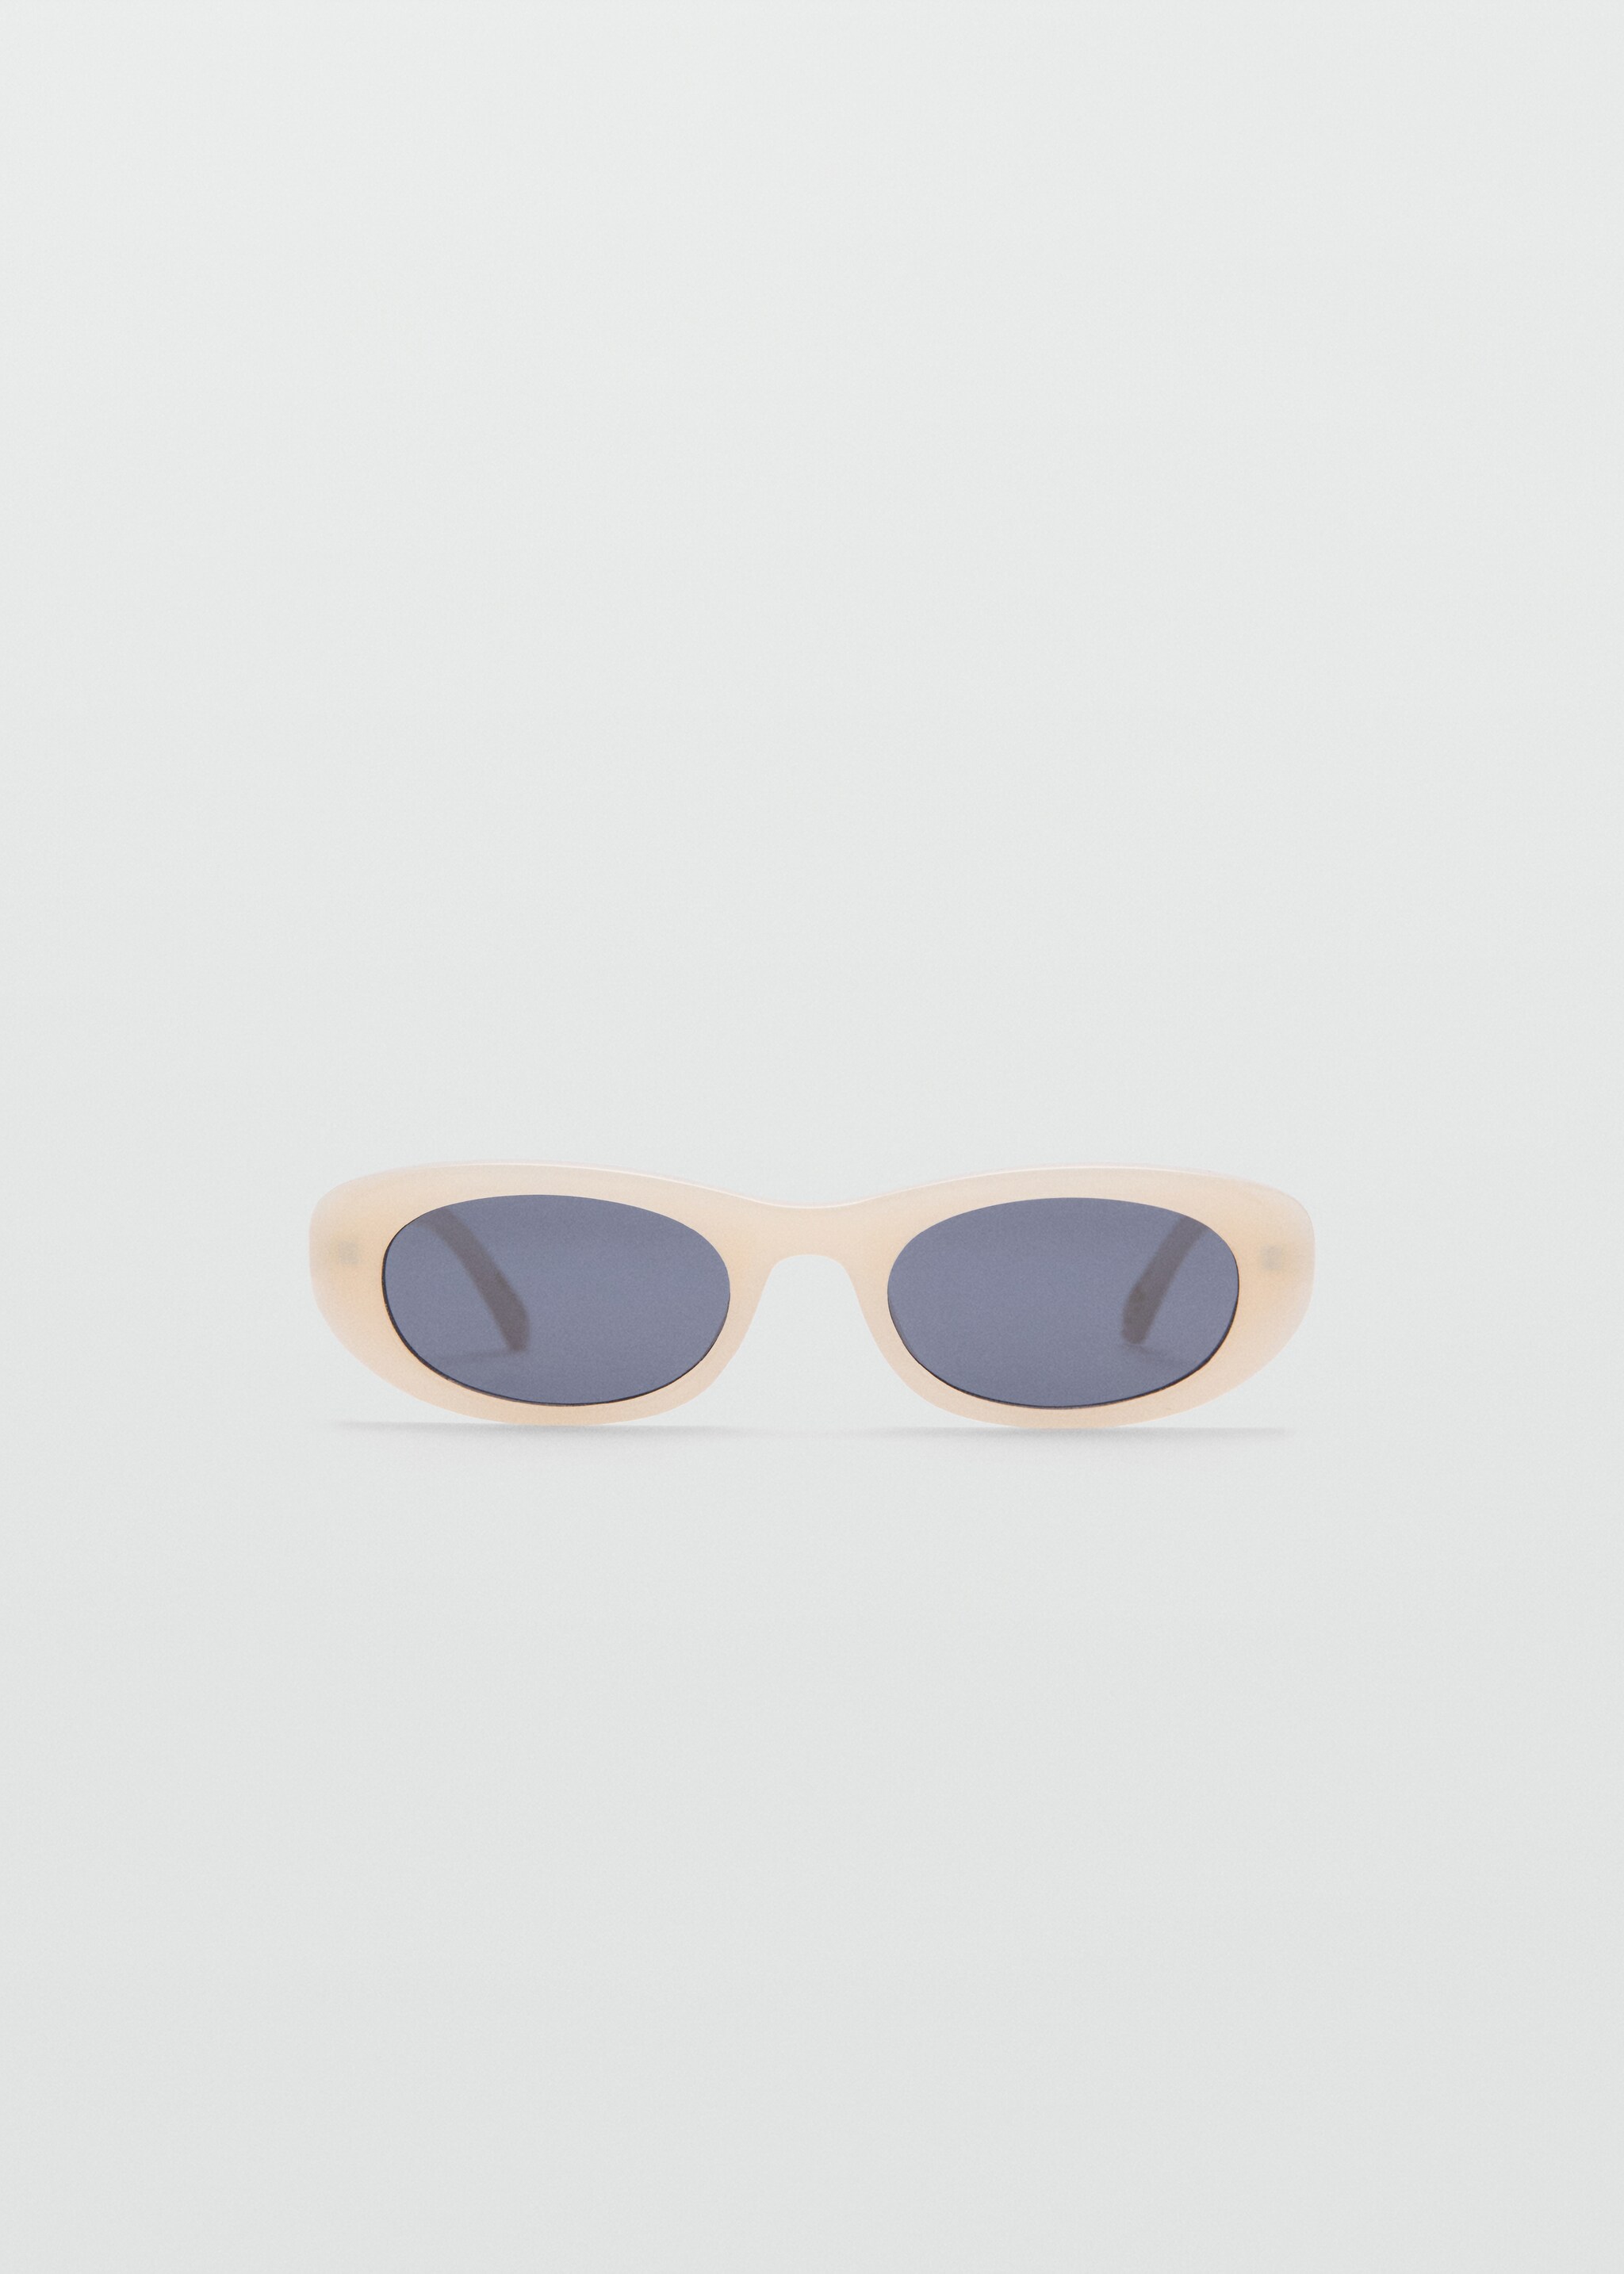 Oval sunglasses - Article without model